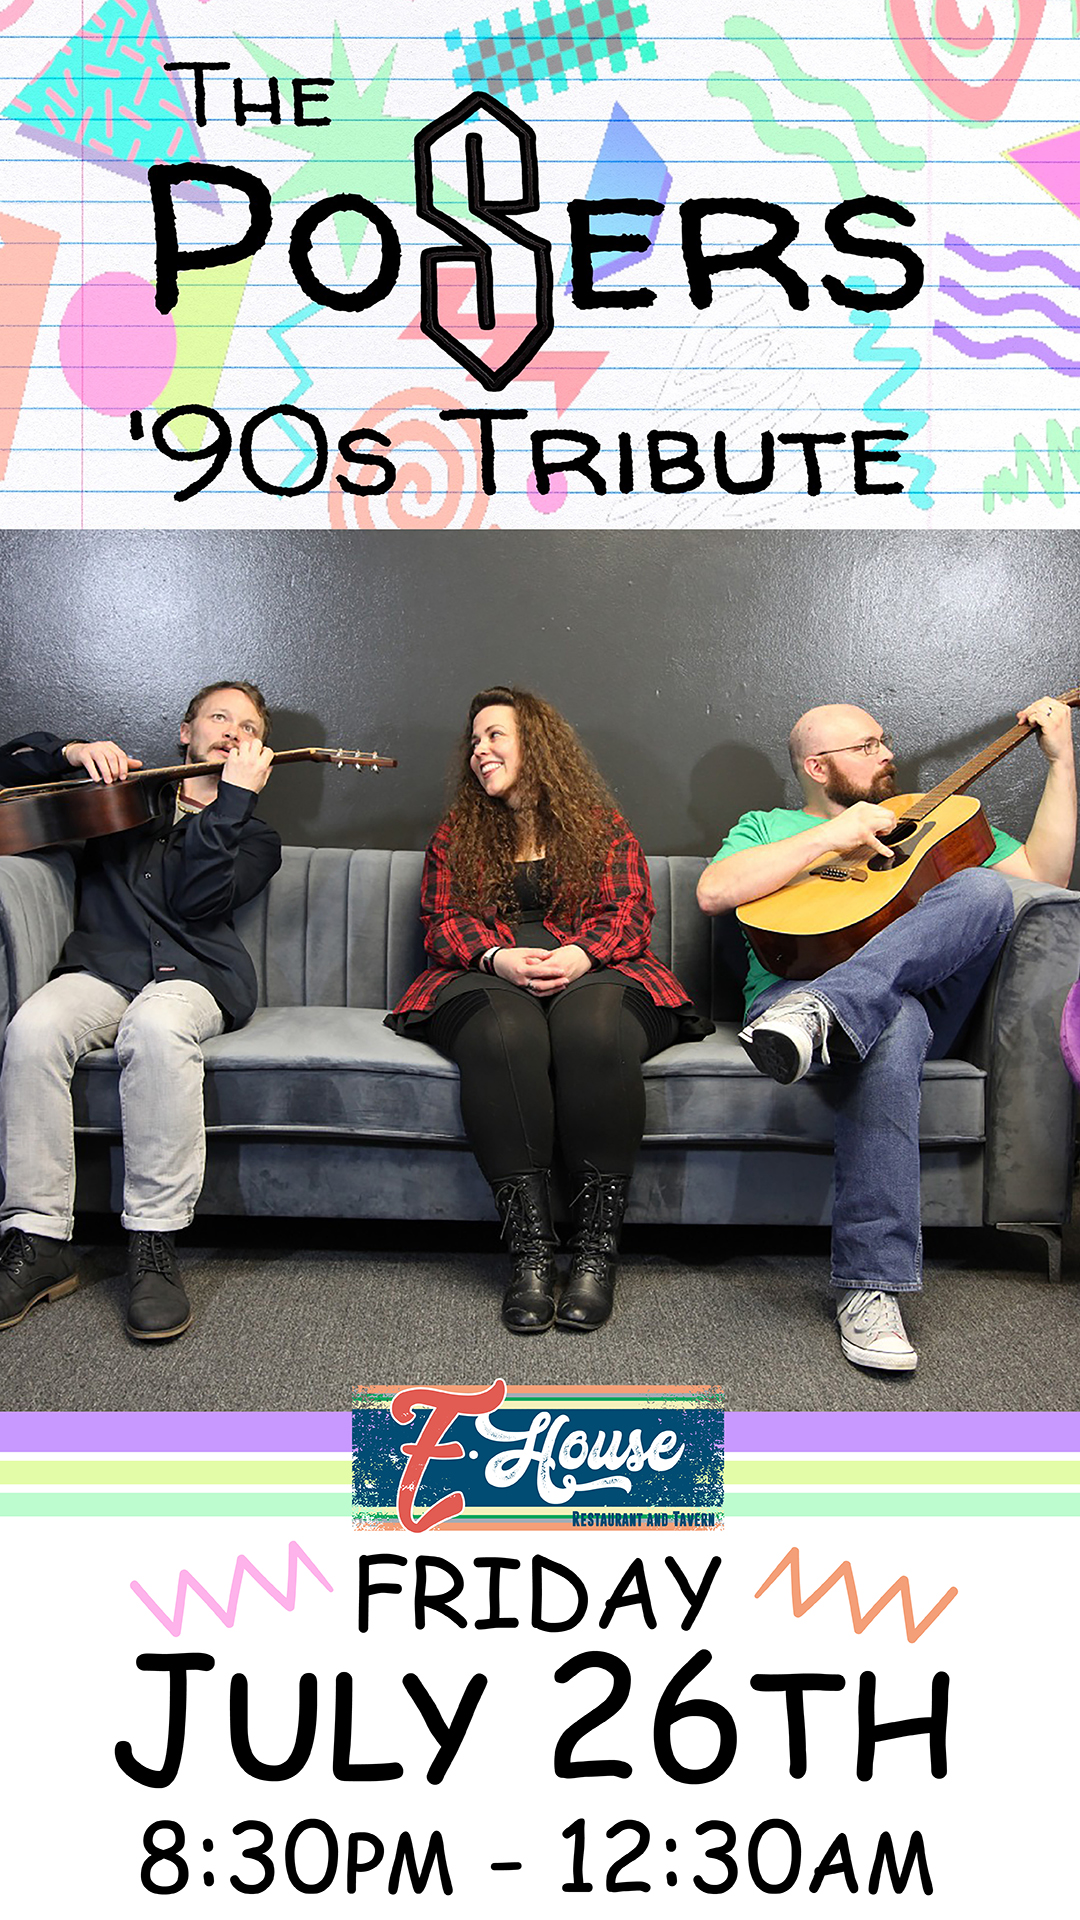 Poster for The Posers '90s Tribute band performance at Z-House on Friday, July 26th from 8:30 PM to 12:30 AM, featuring three band members sitting on a couch with guitars.